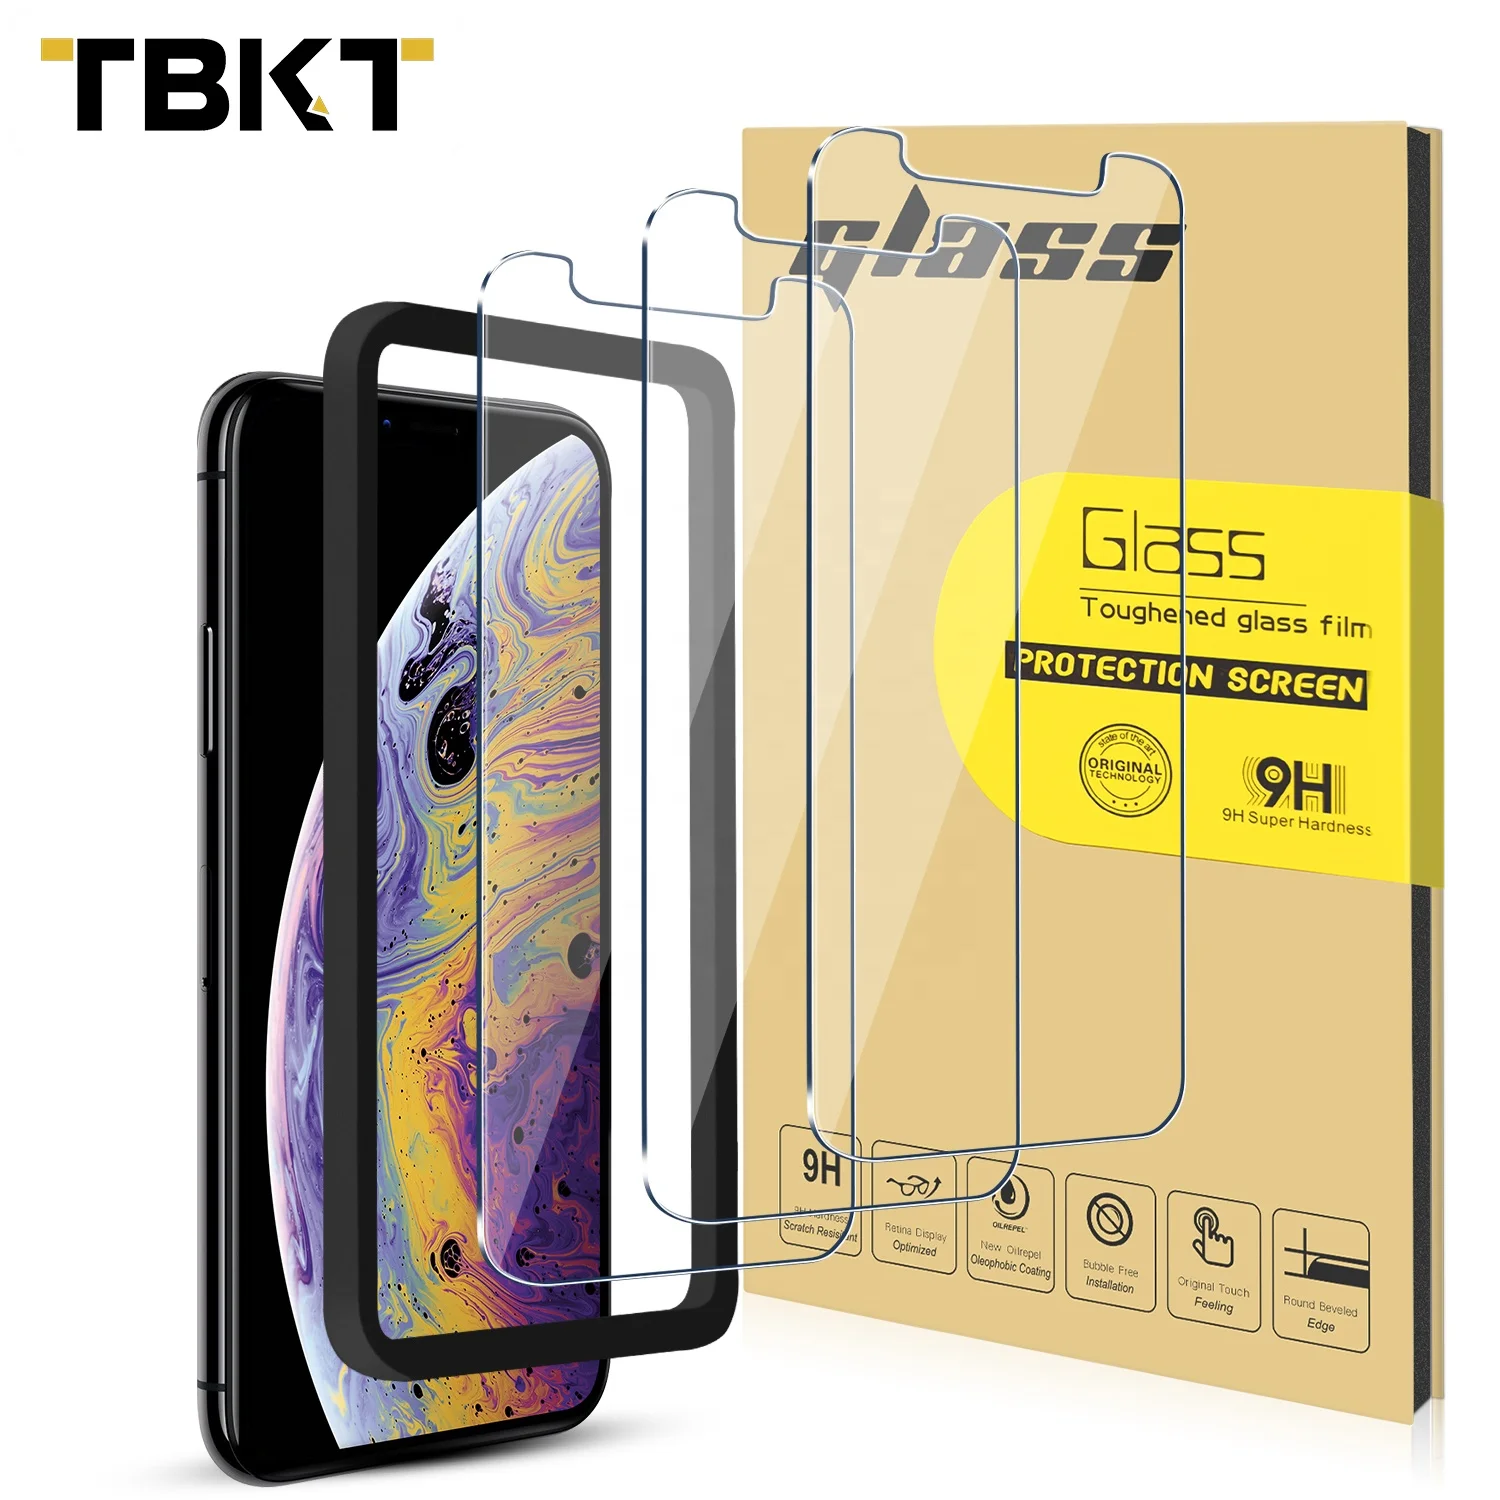 

9H Screen protection Glass for iphone XS 5.8 Screen Tempered Glass L Slot 0.33mm 3D Screen protctor Japan +AB Glue